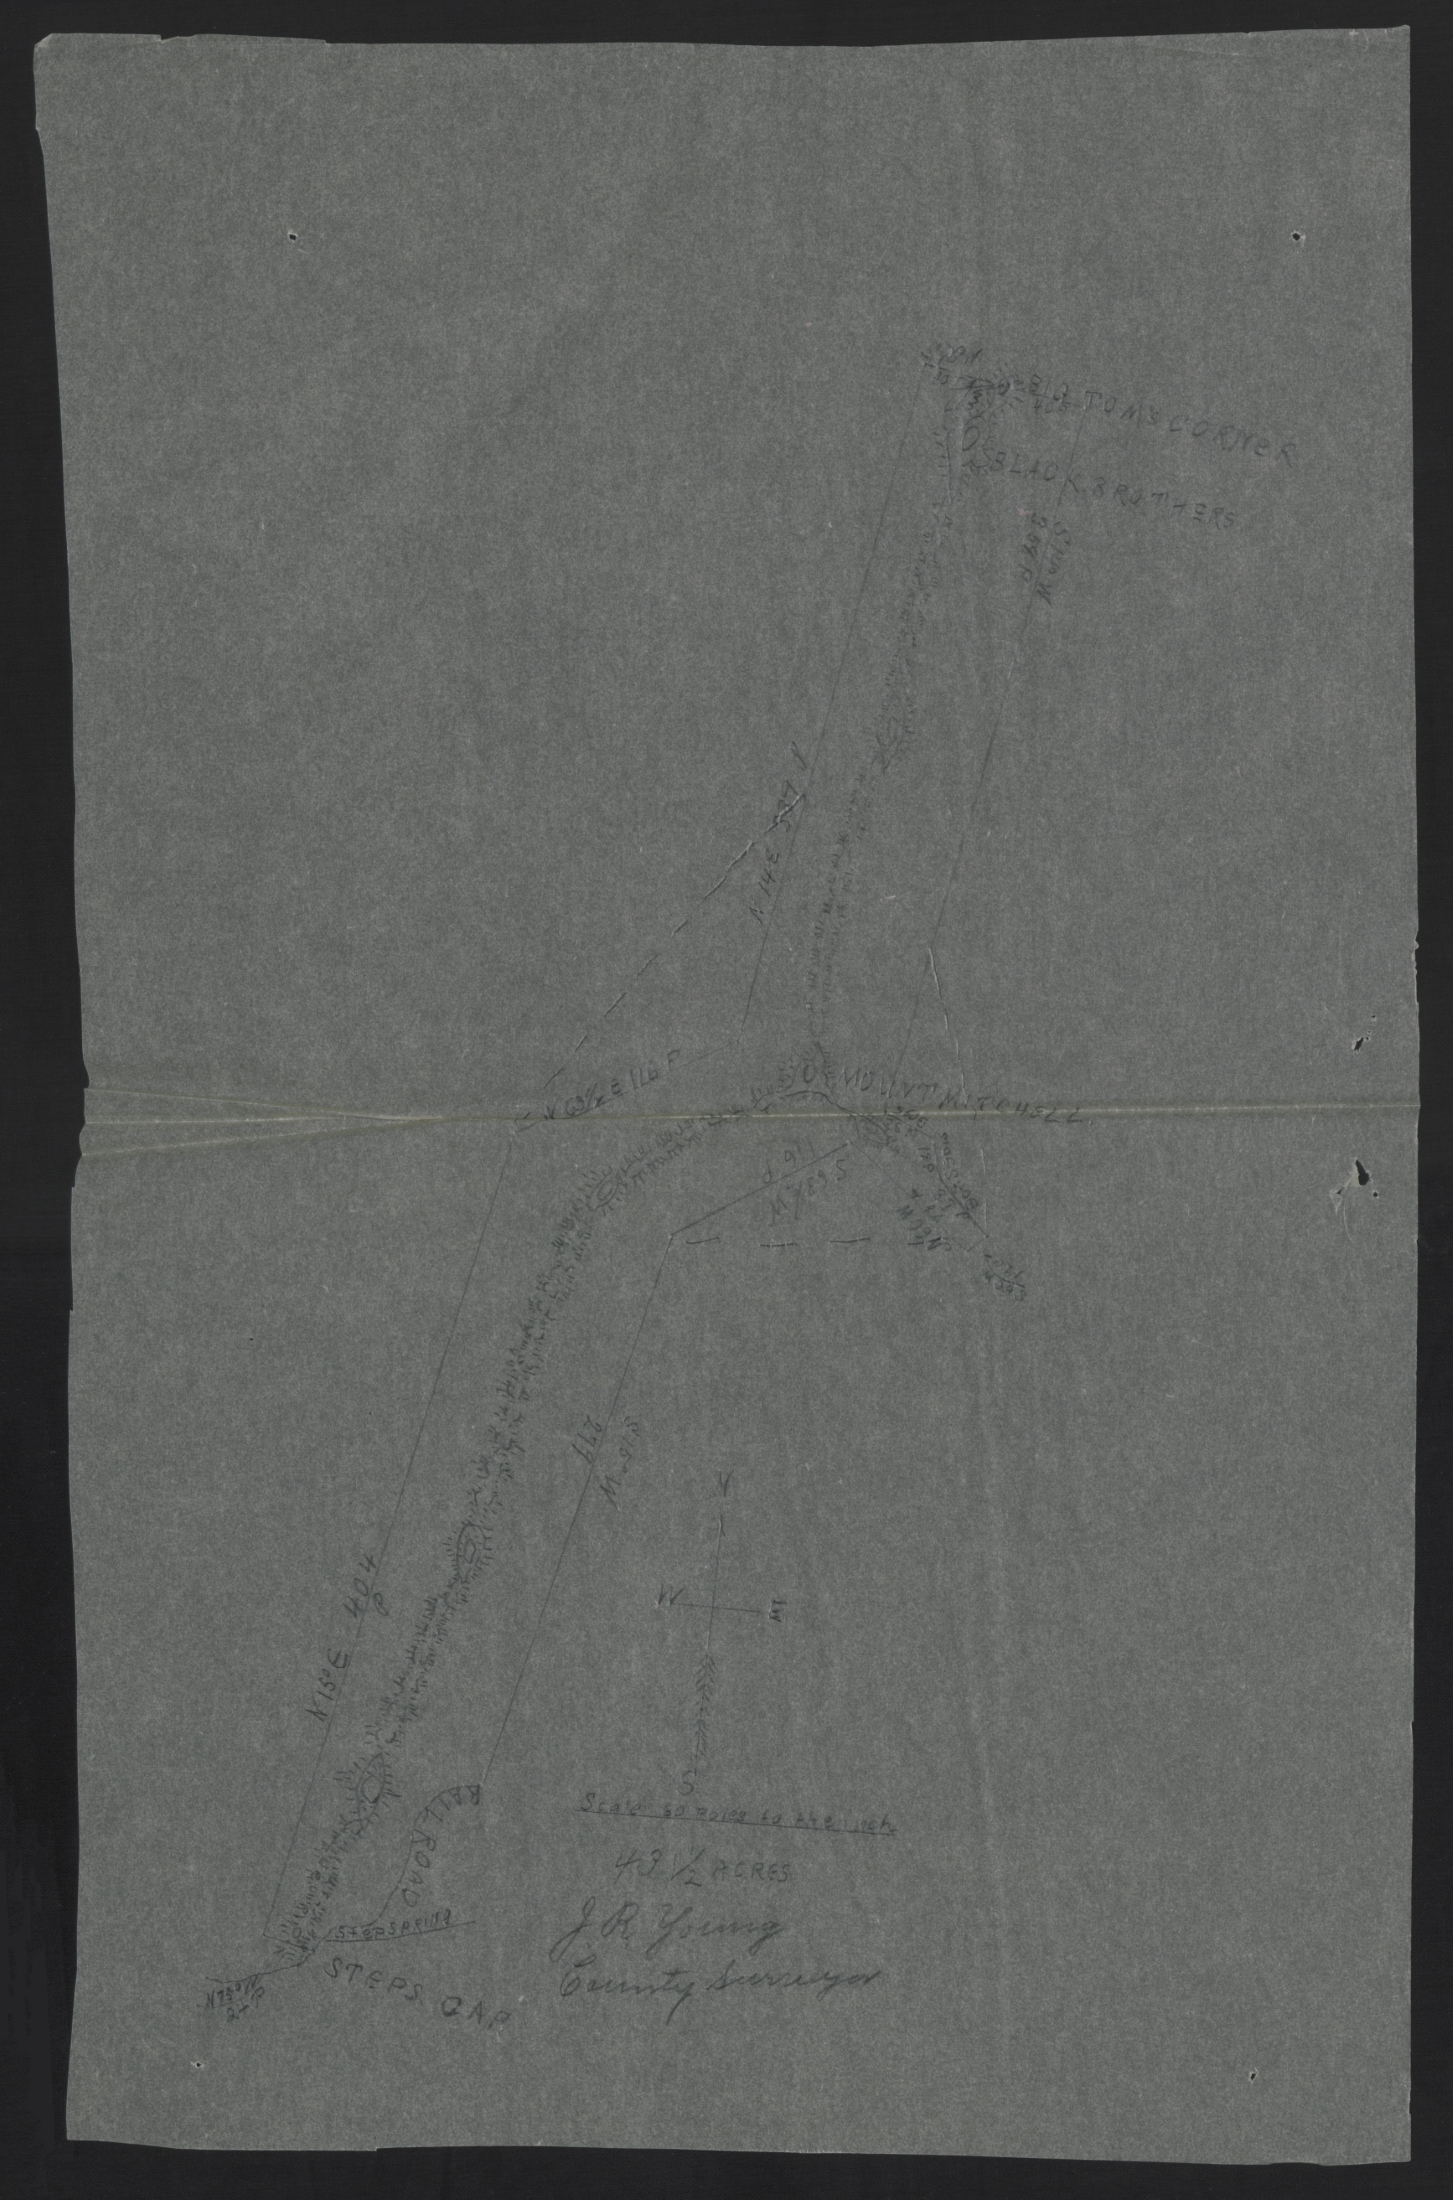 Survey of Proposed Mount Mitchell State Park Property, circa May 1915